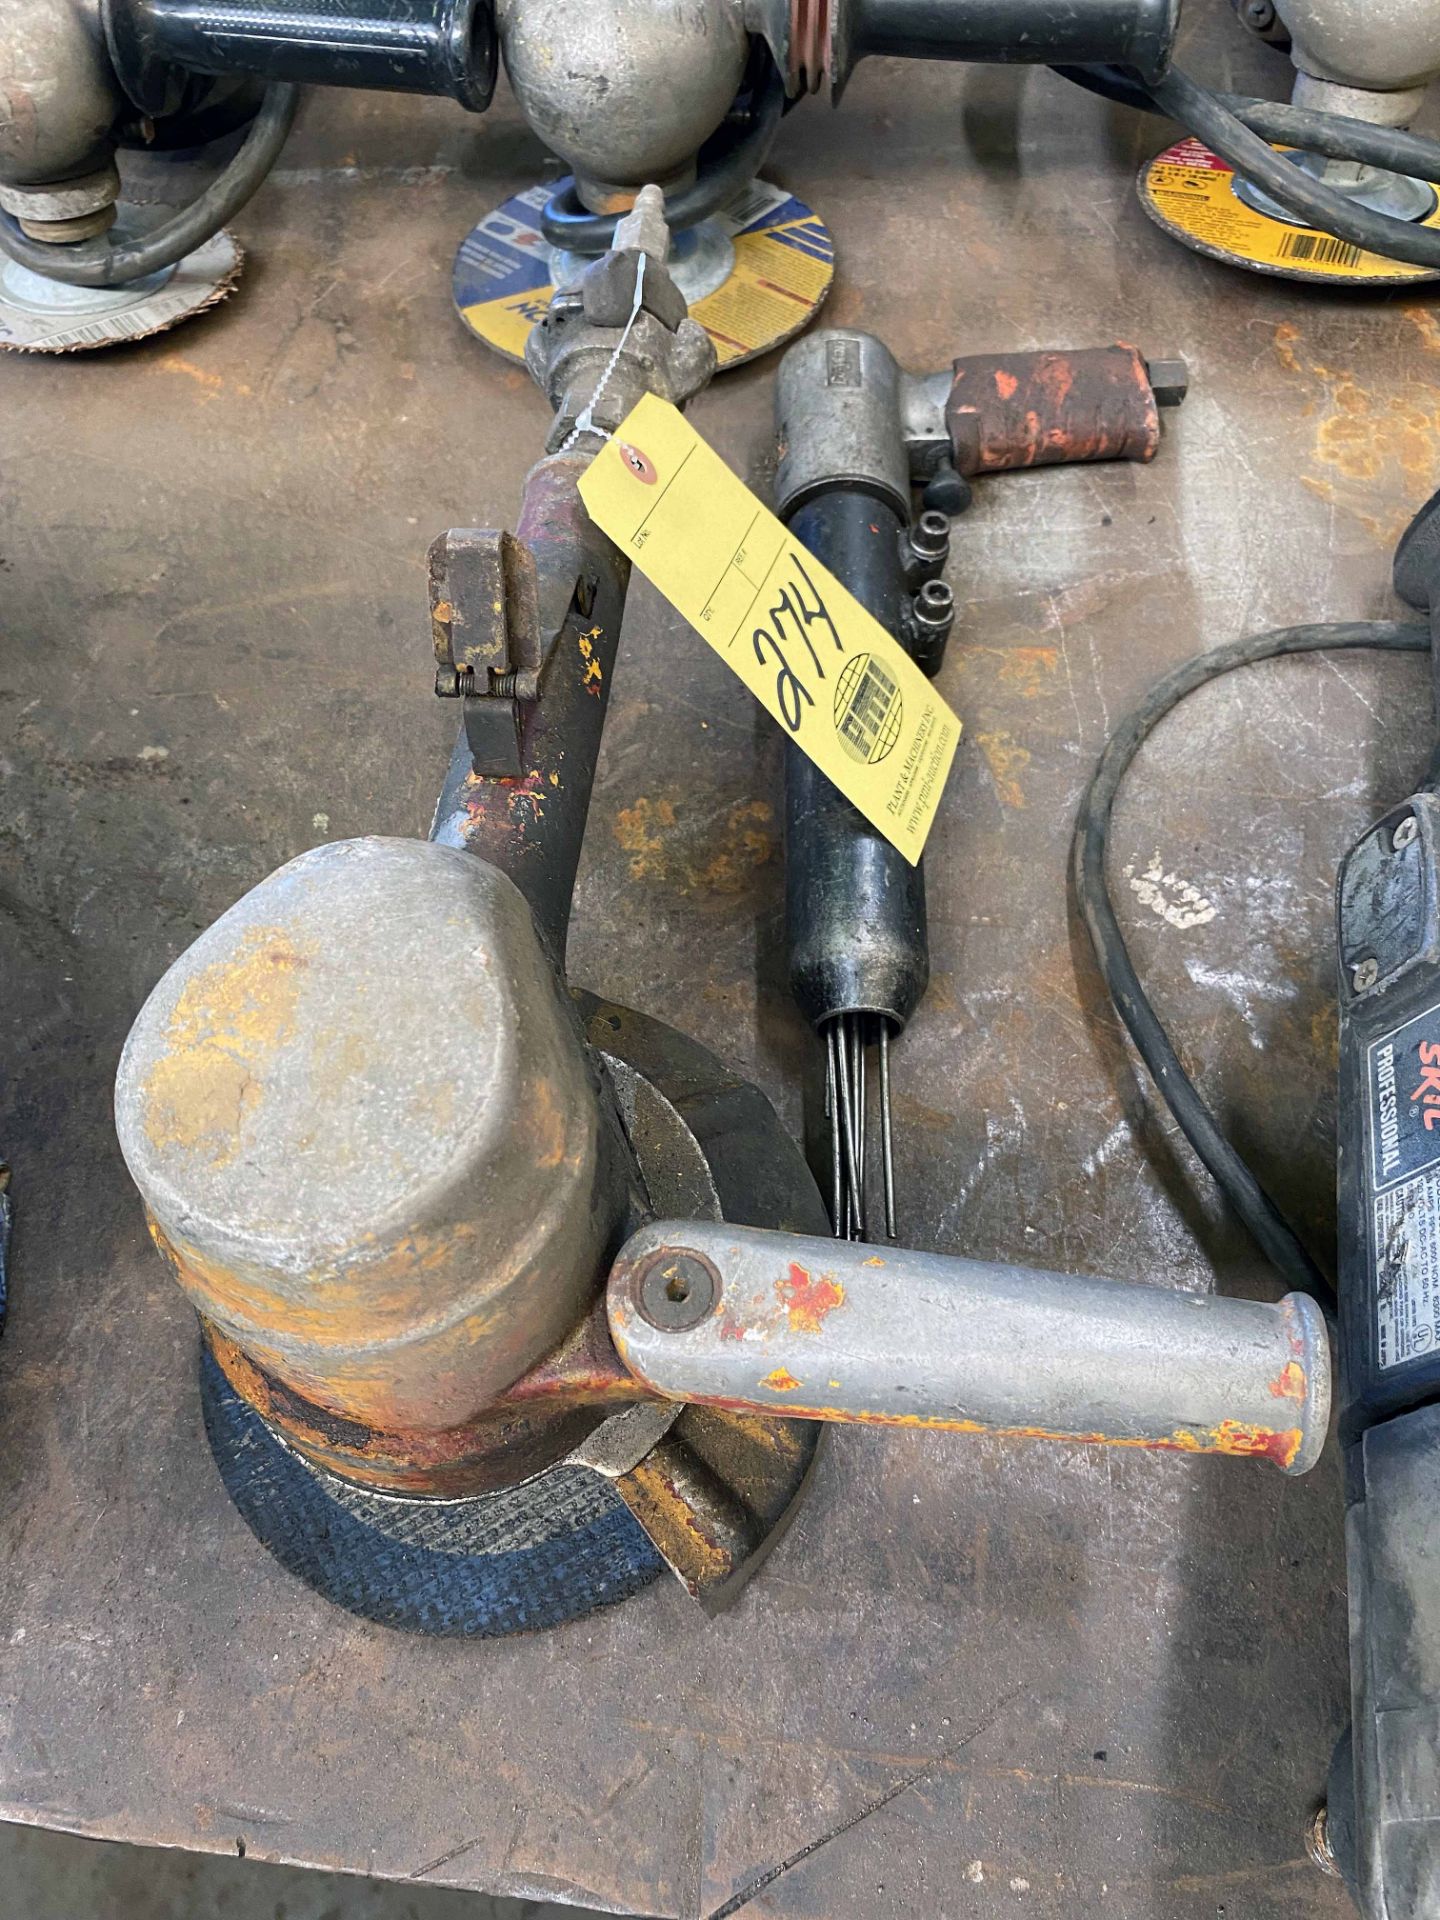 LOT CONSISTING OF: angle grinder & scaler (Located at: Summit Seals, 750 Archie Street, Vidor, TX